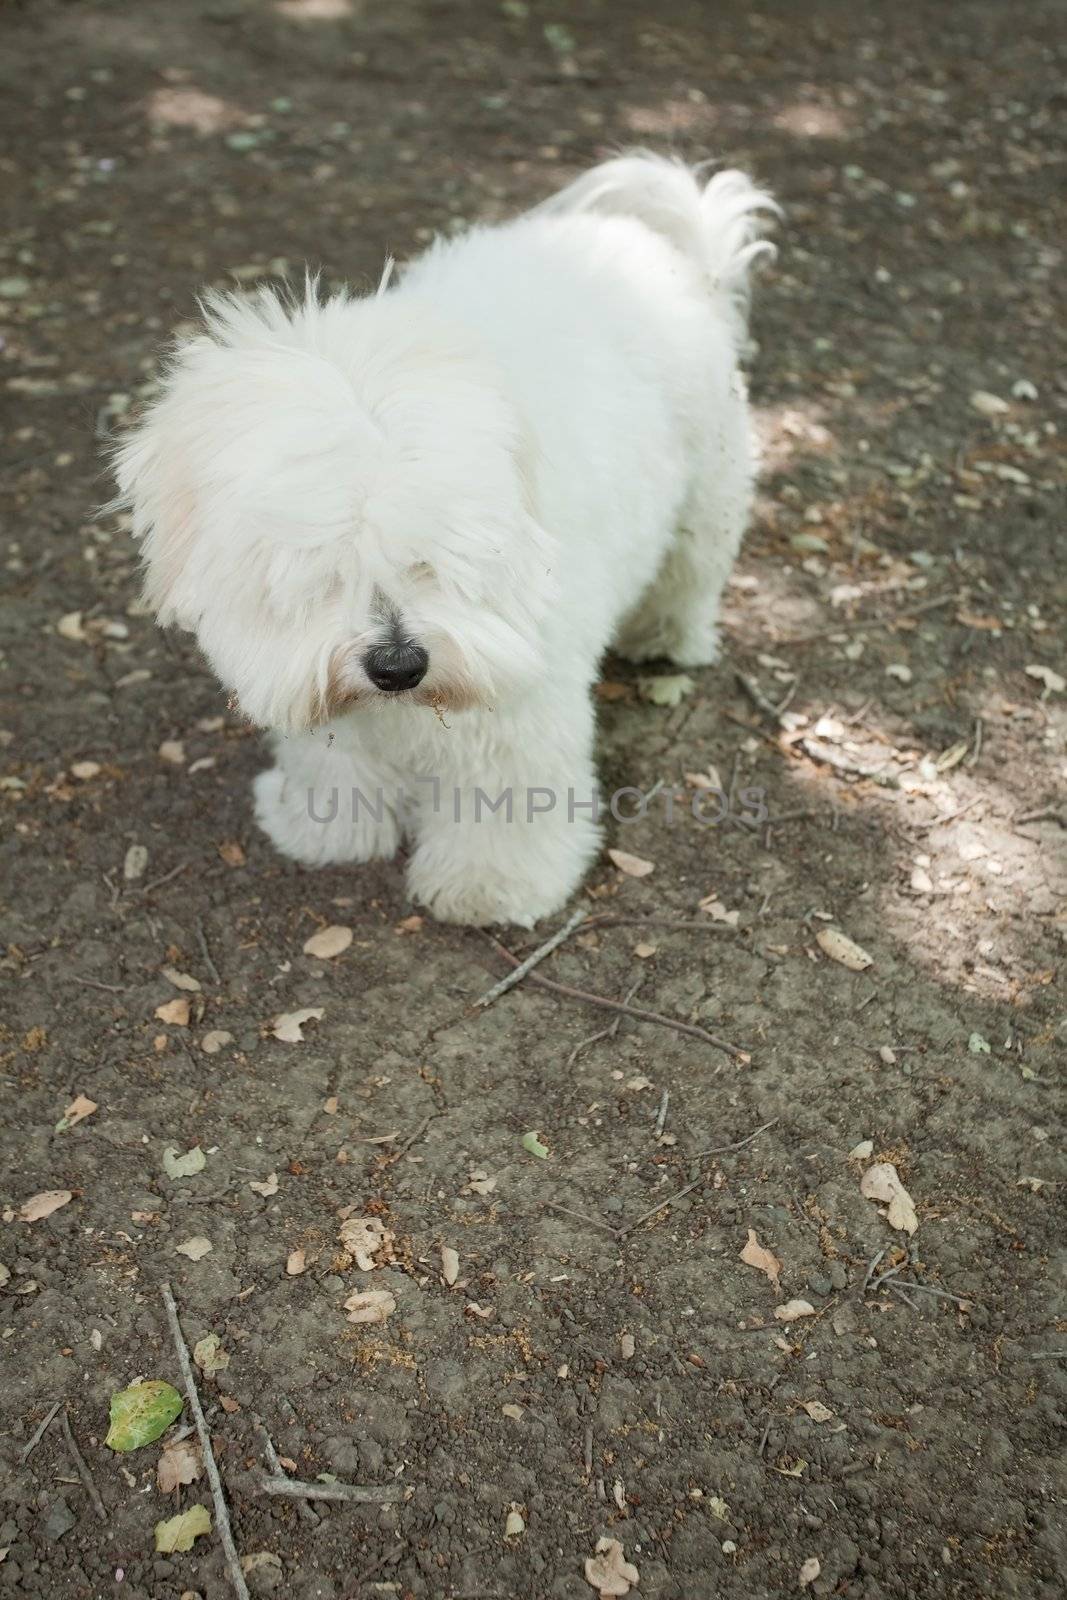 Coton de Tul�ar is a small breed of dog. It is named after the city of Tulear in Madagascar, and for its cottony textured coat